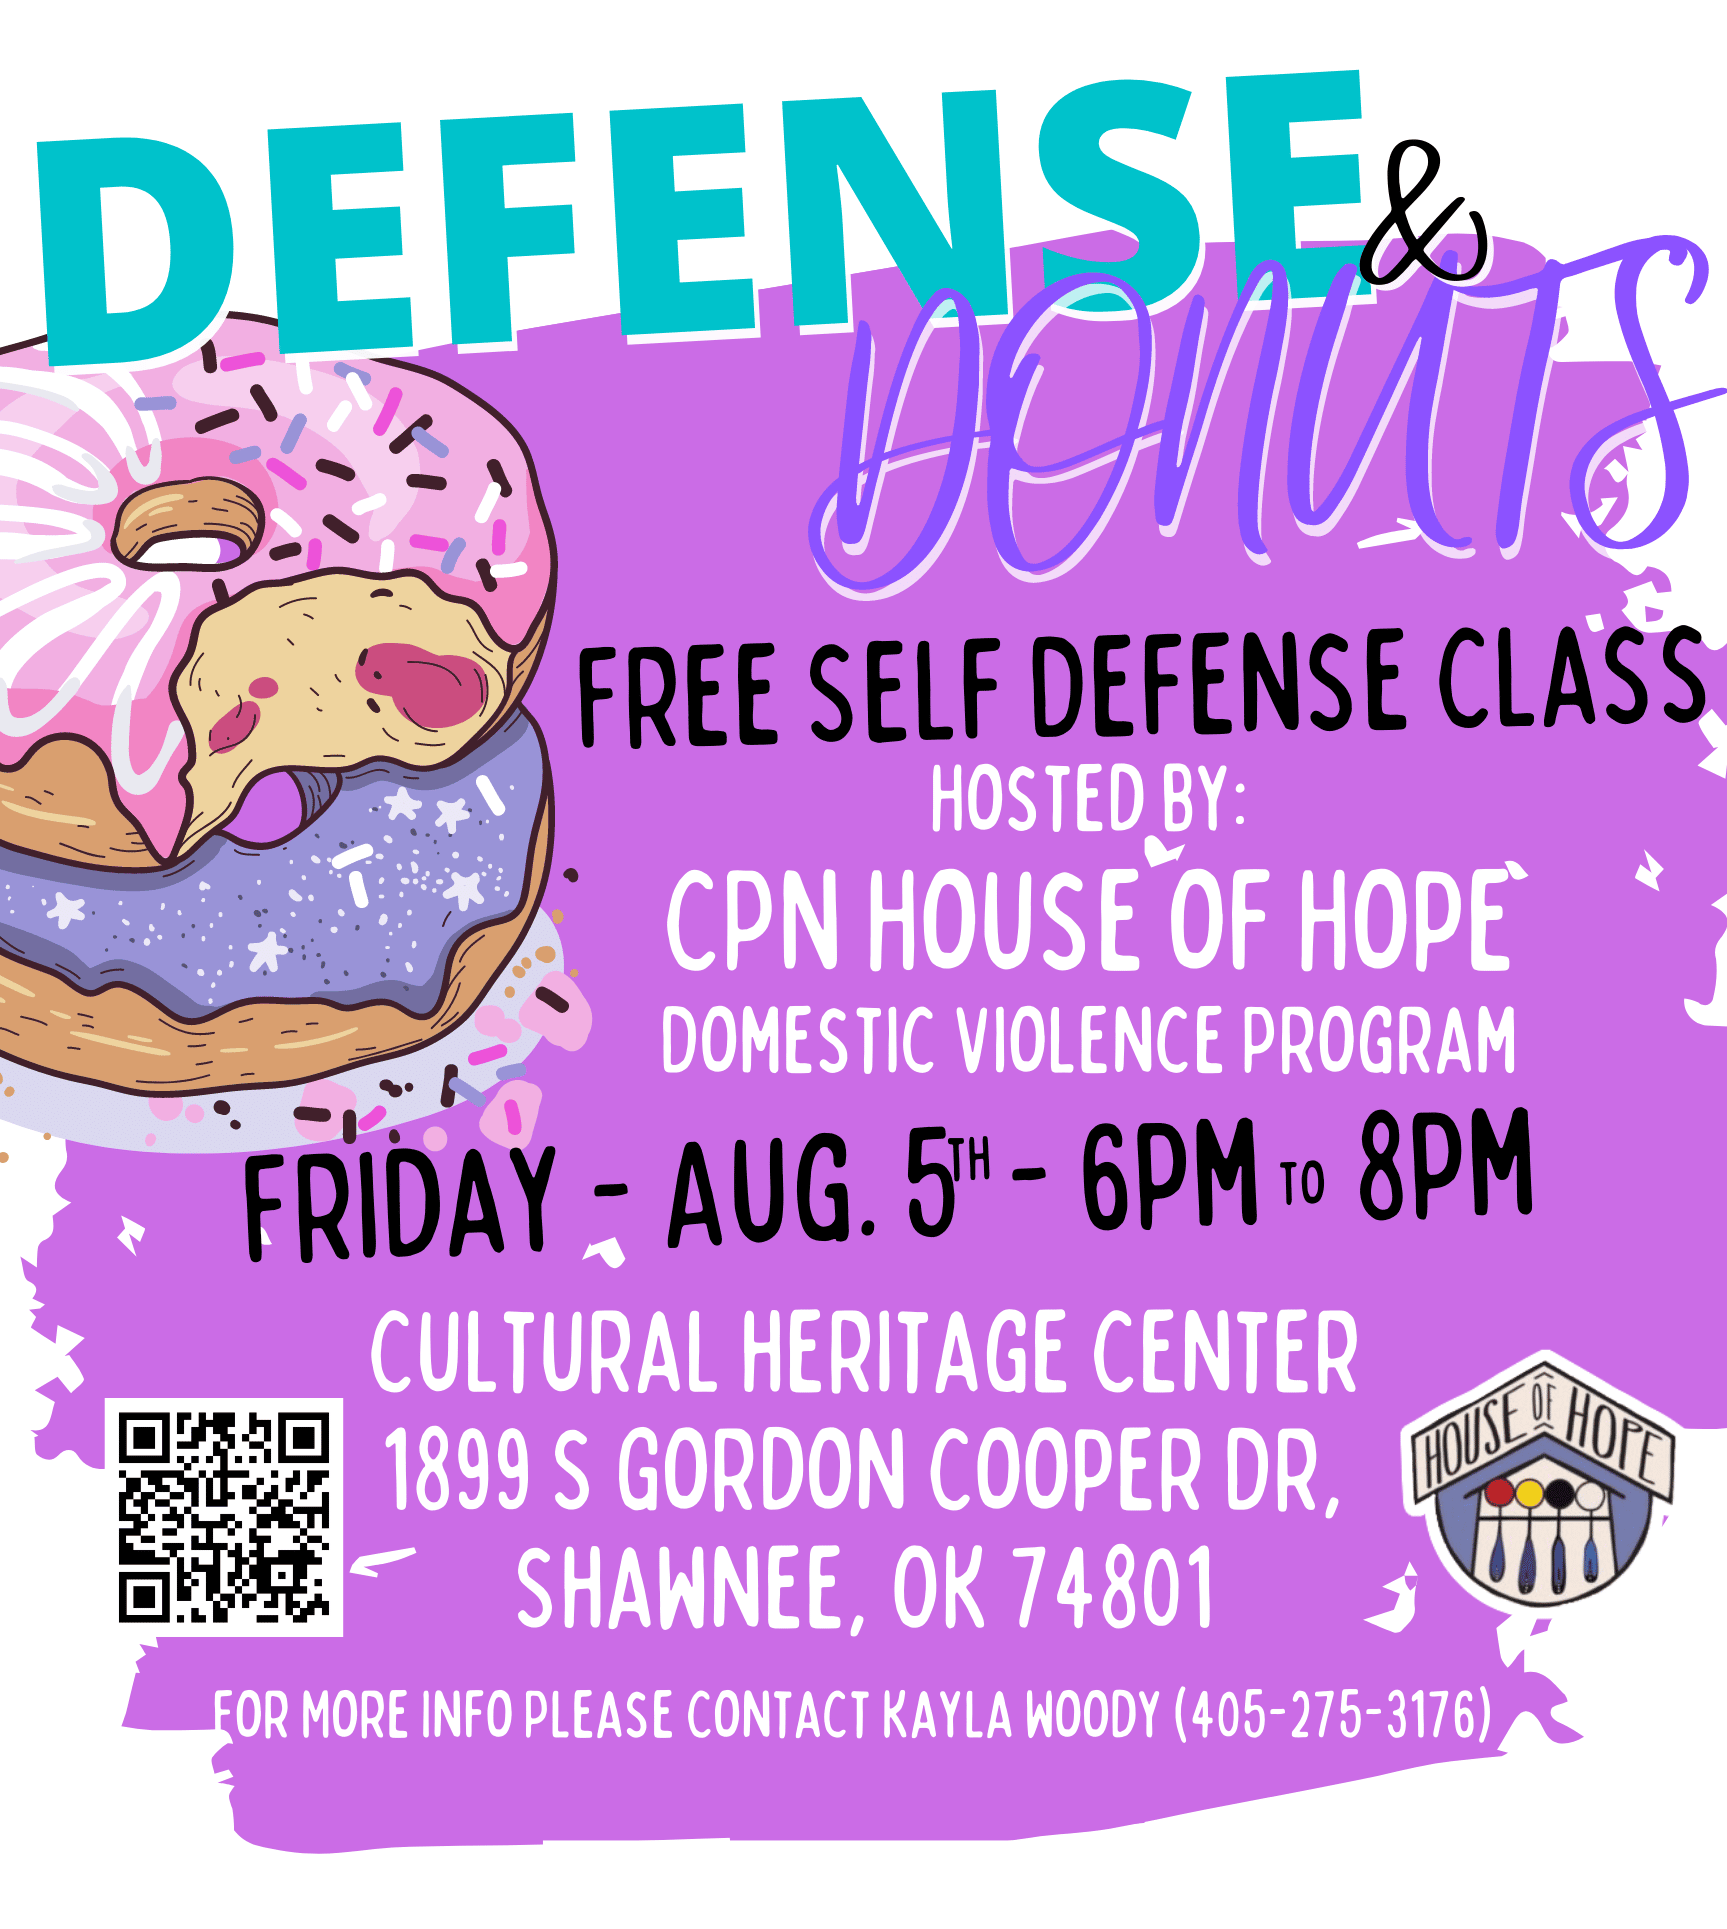 A brightly colored flyer in purples and teals advertising the Citizen Potawatomi Nation House of Hope's annual Defense and Donuts class at the CPN Cultural Heritage Center on Friday, August 5 from 6-8pm. The event is free and open to the public.